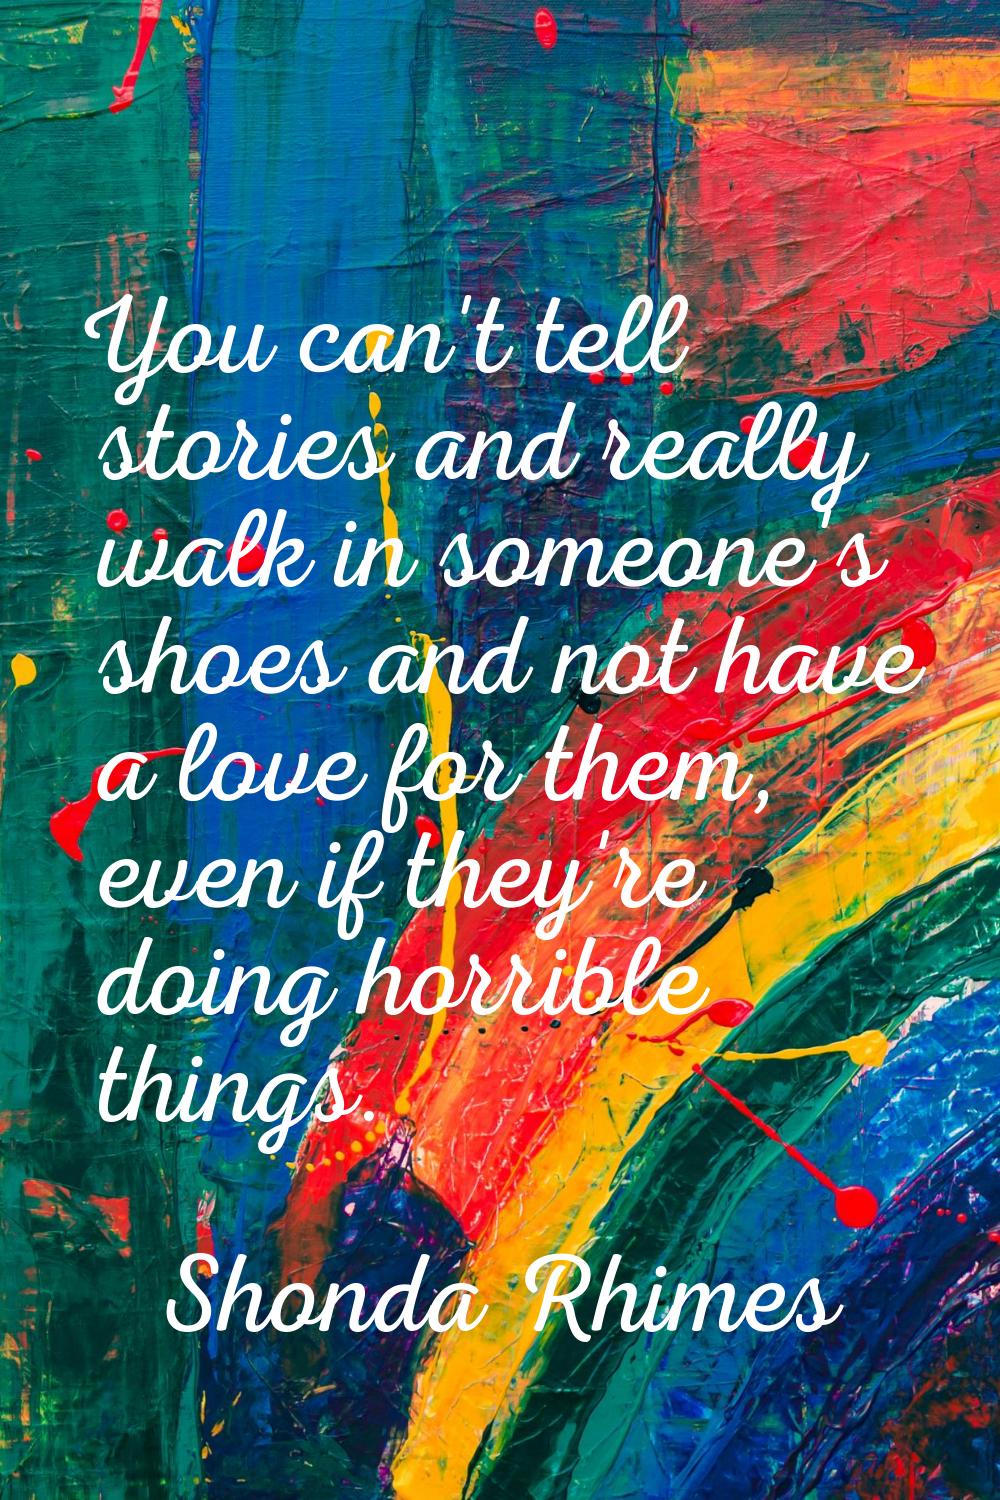 You can't tell stories and really walk in someone's shoes and not have a love for them, even if the